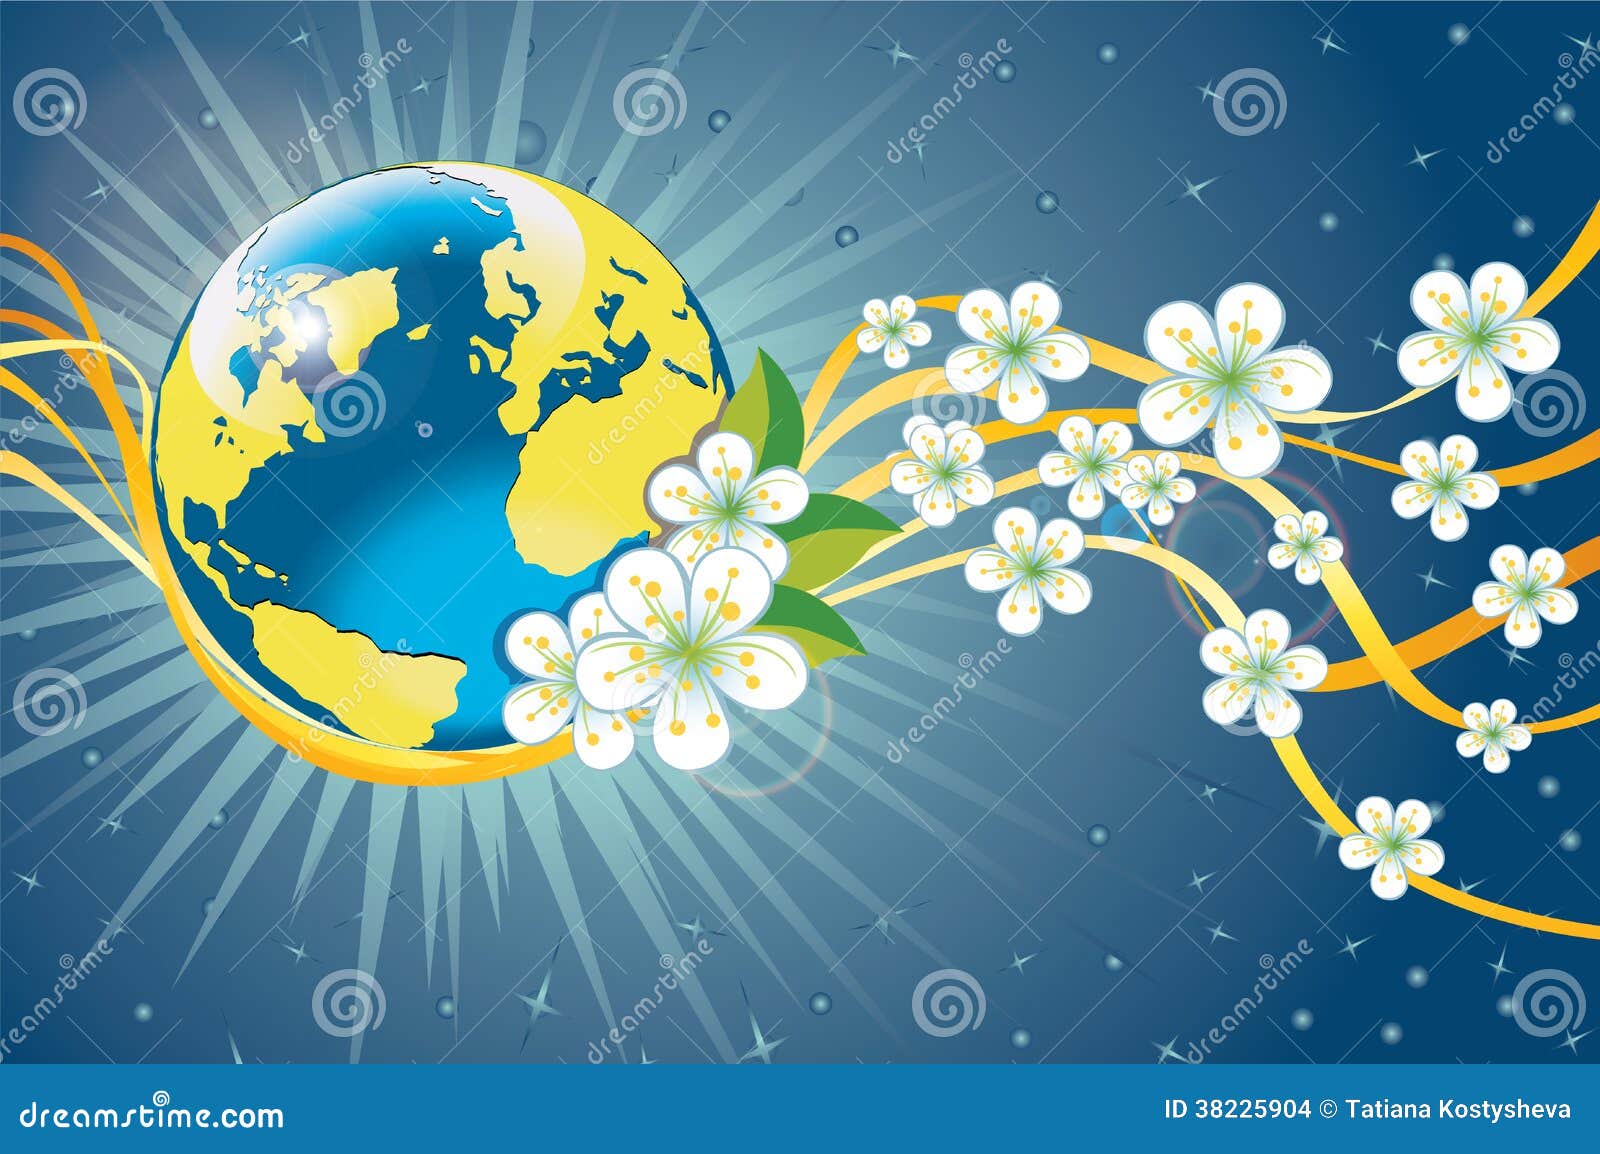 Earth is surrounded by flowers happy Royalty Free Vector